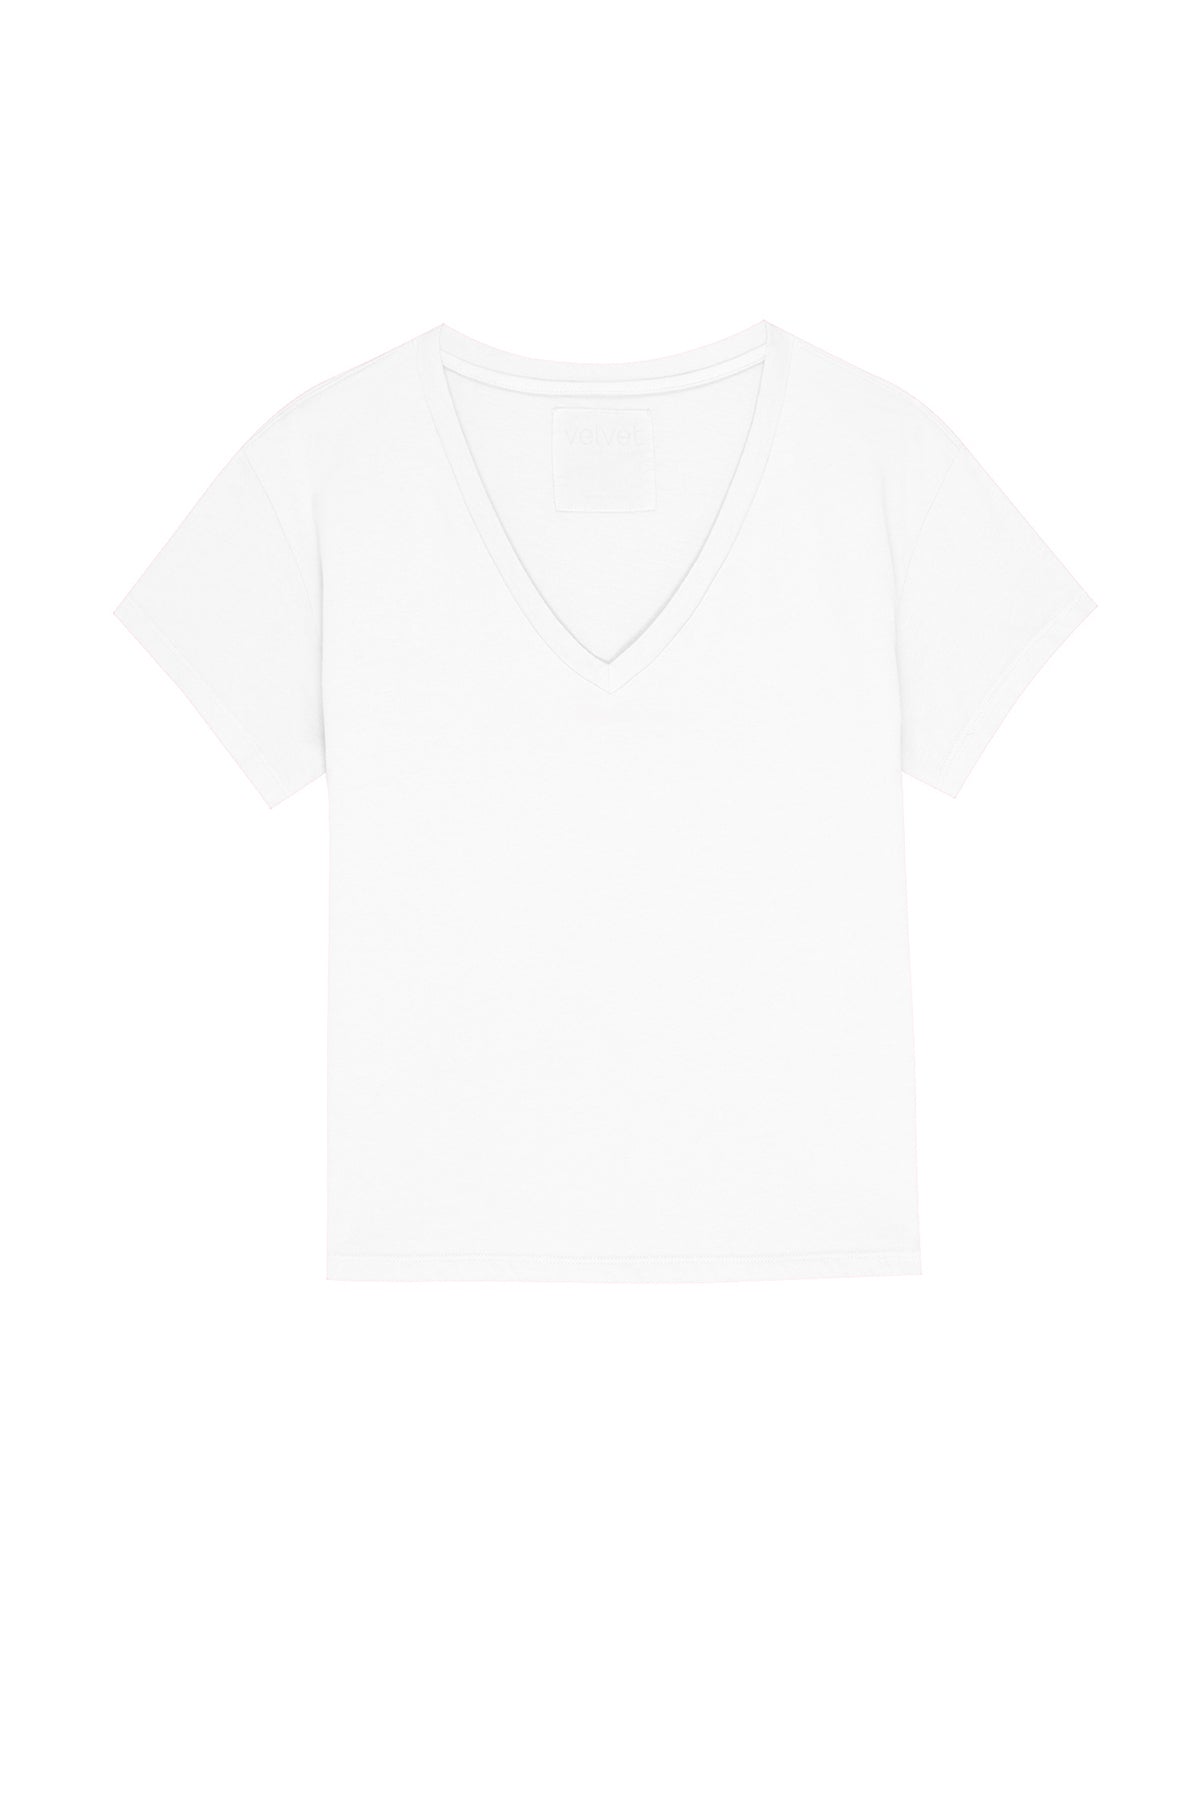 venice tee white front flat-24351808389313